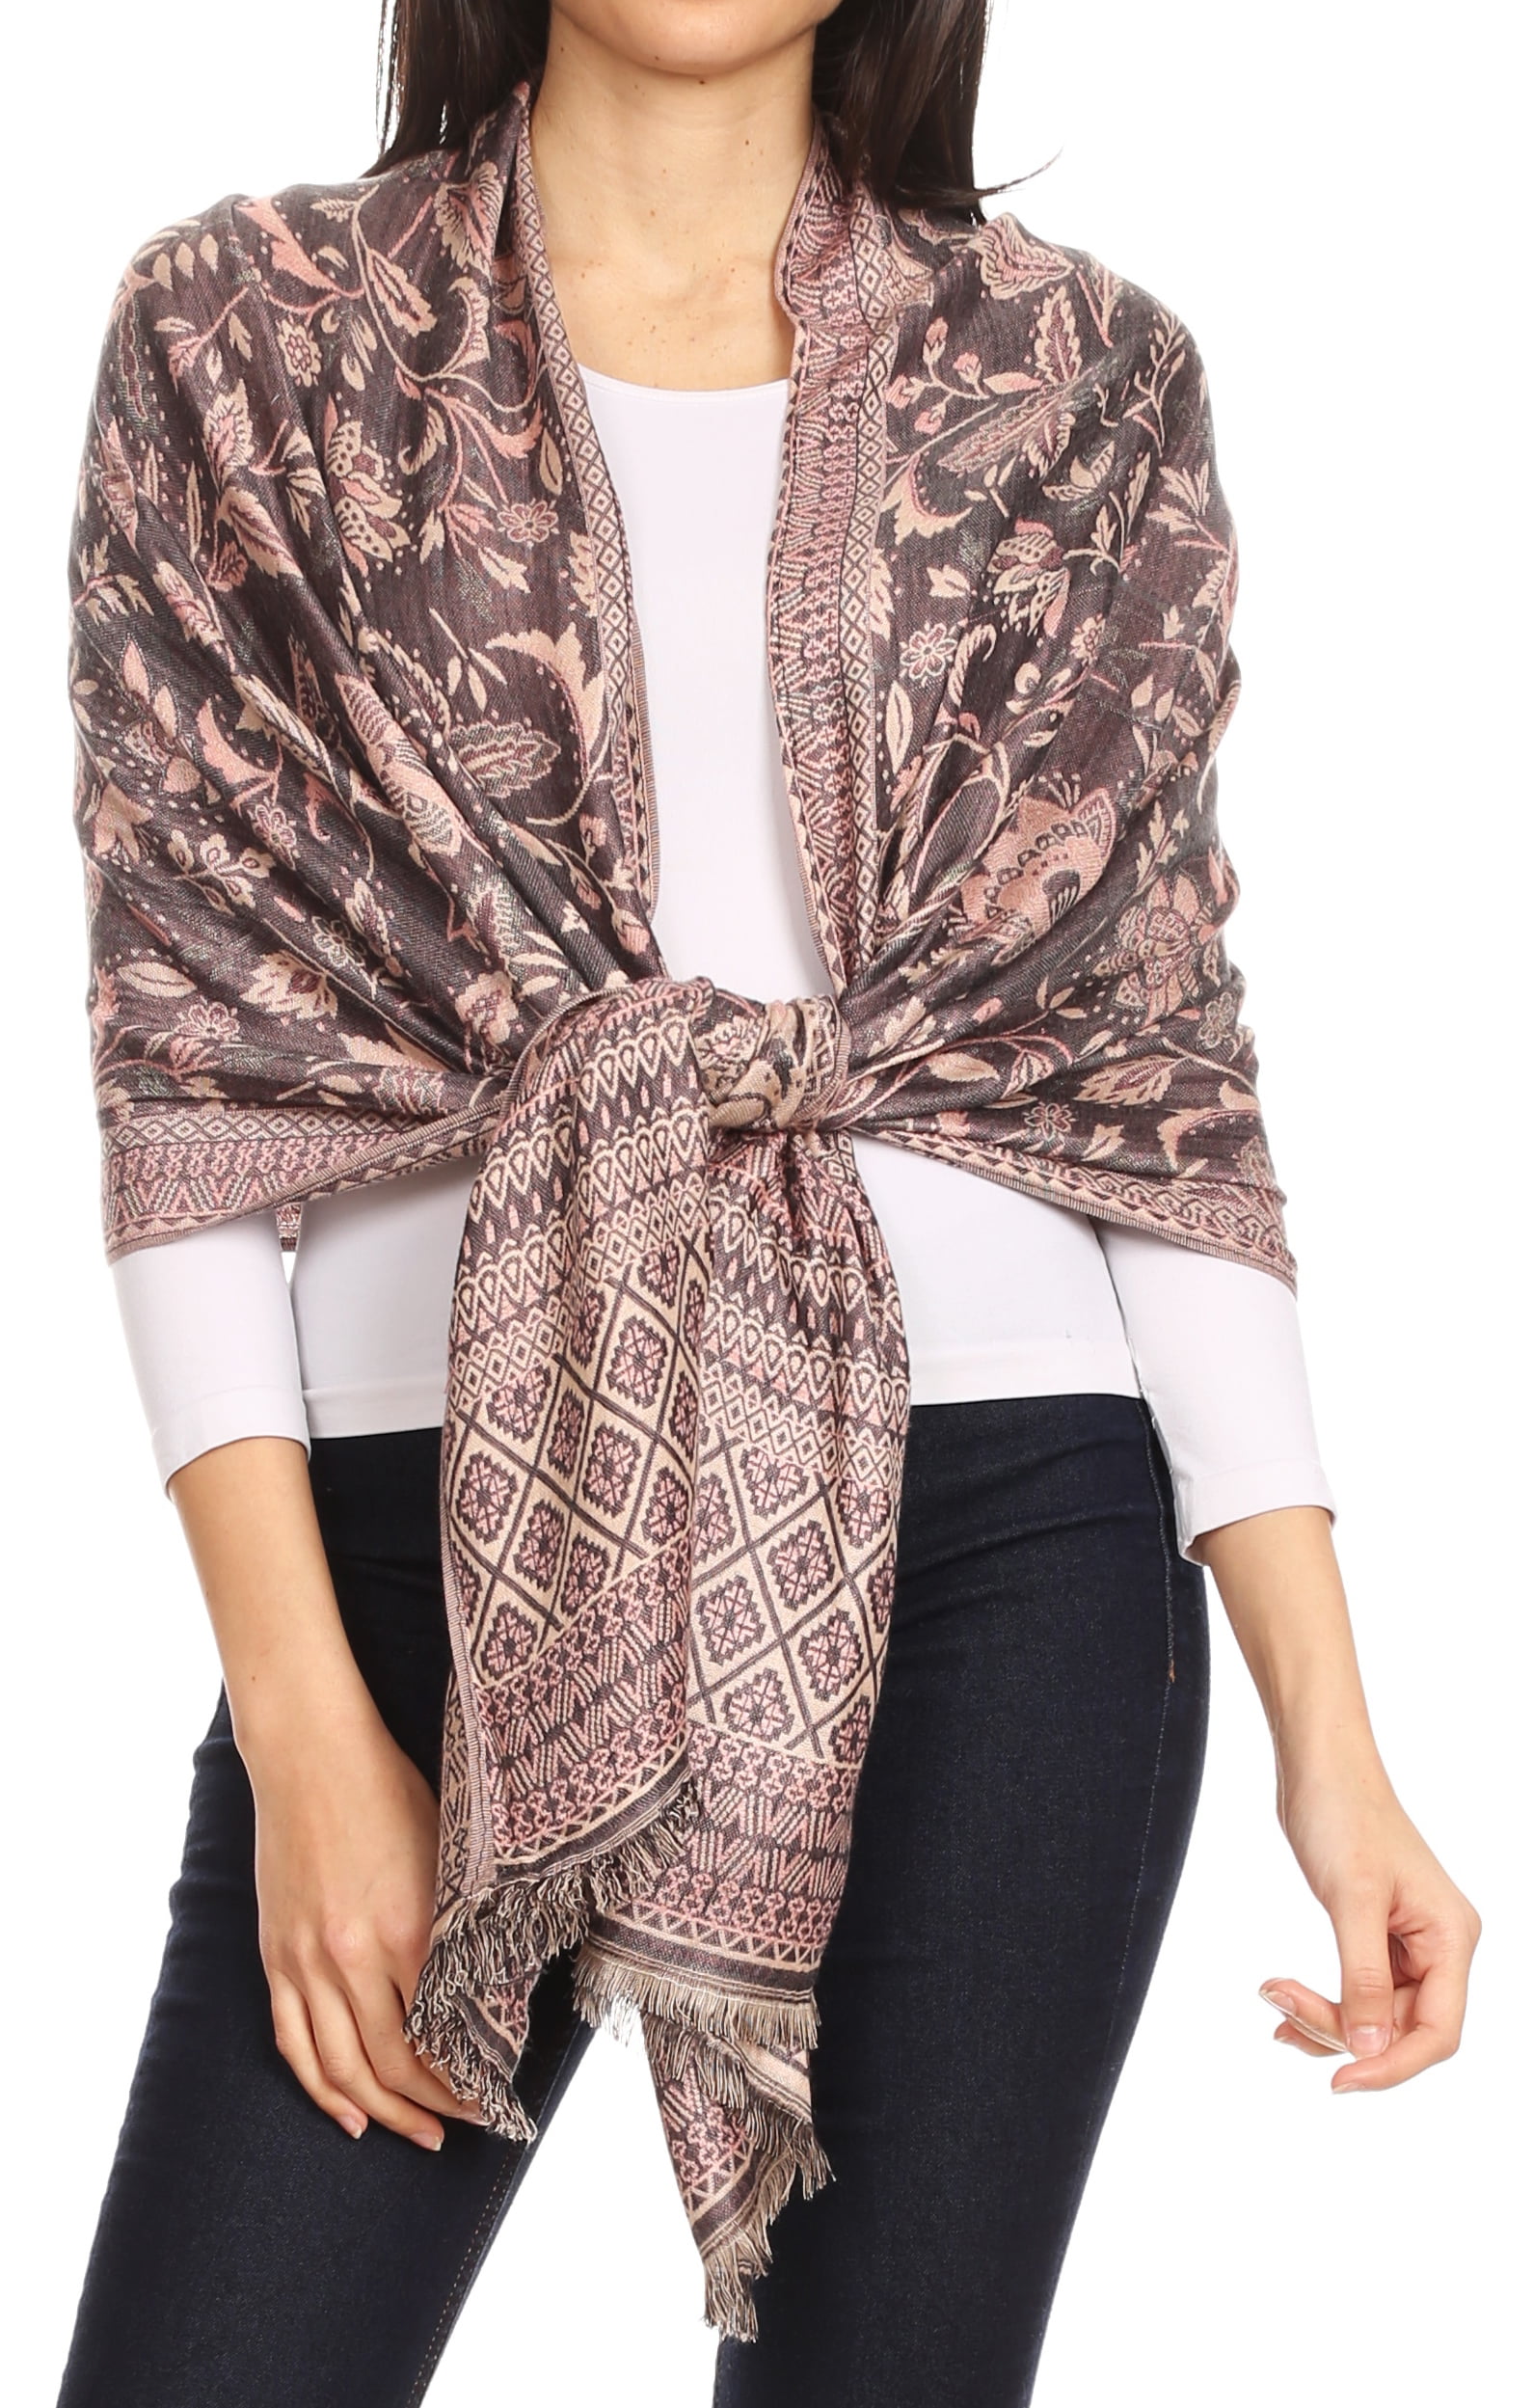 Ted & Jack Luxe Butterfly Patterned Reversible Pashmina